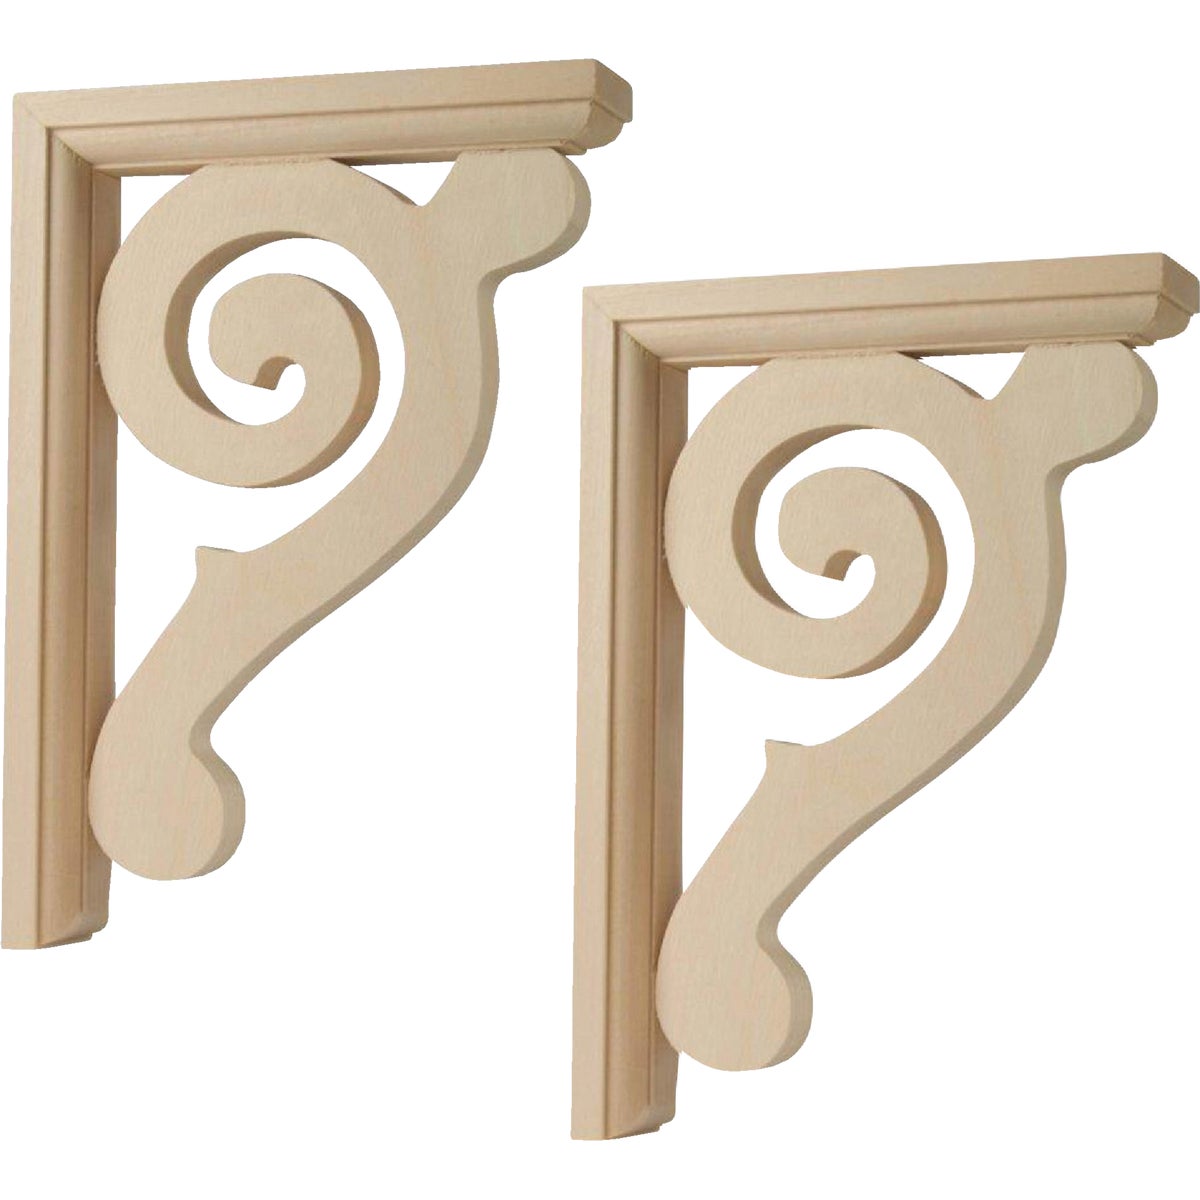 Waddell Crescent Corbel (2 Count)